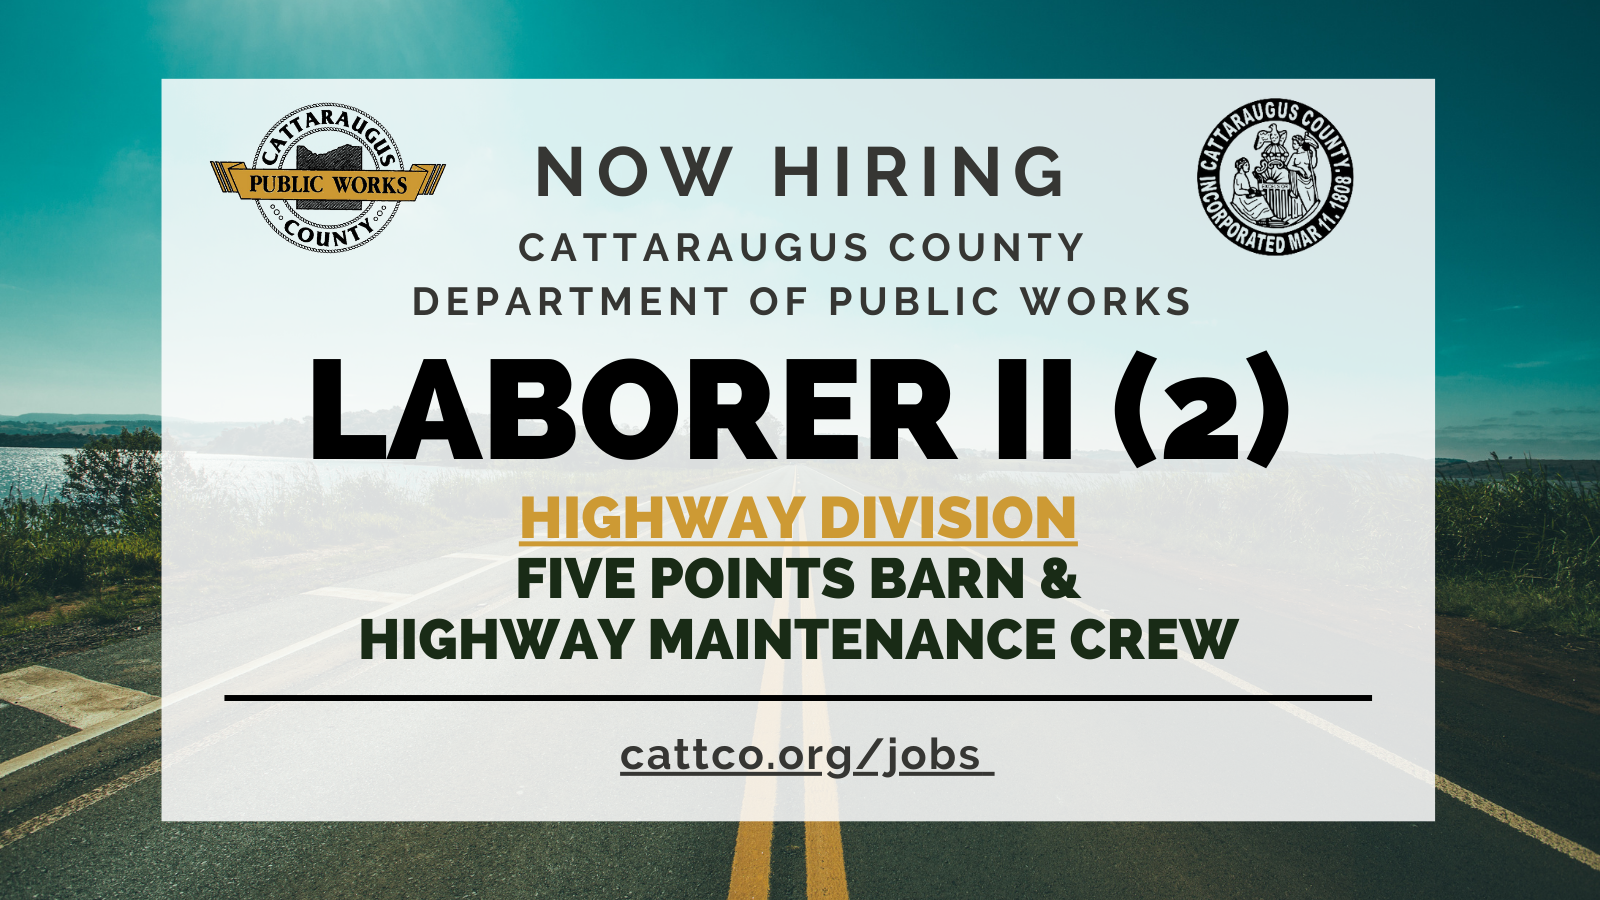 A job posting requests applicants for a Laborer II in both the Highway Maintenance and Five Points locations (Cattaraugus County Department of Public Works).